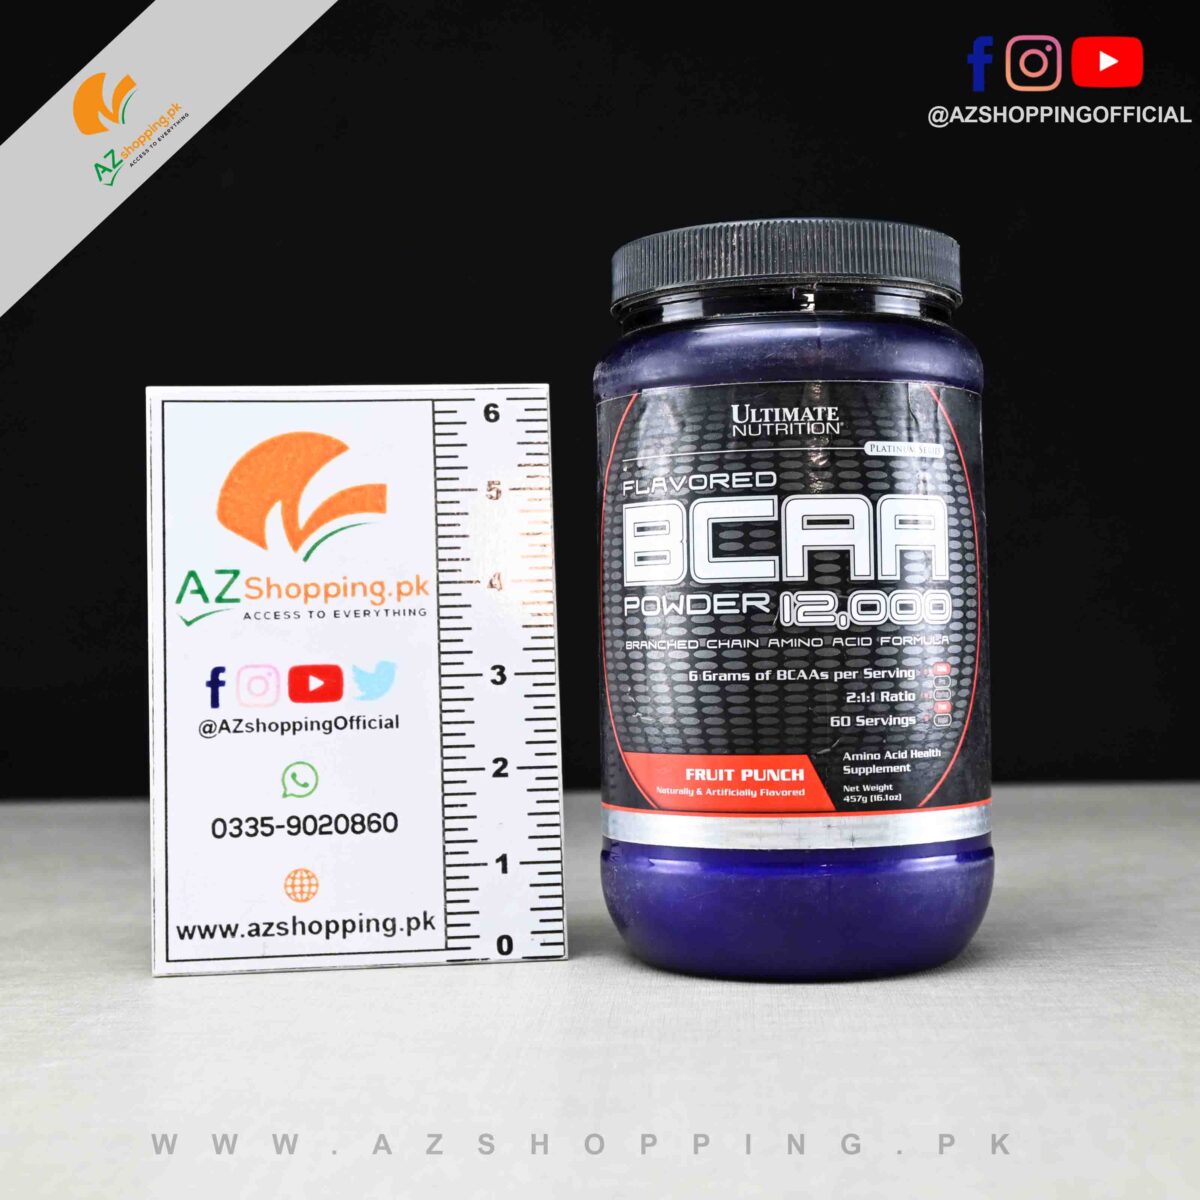 Ultimate Nutrition – Flavored BCAA Powder 12,000 – 60 Servings